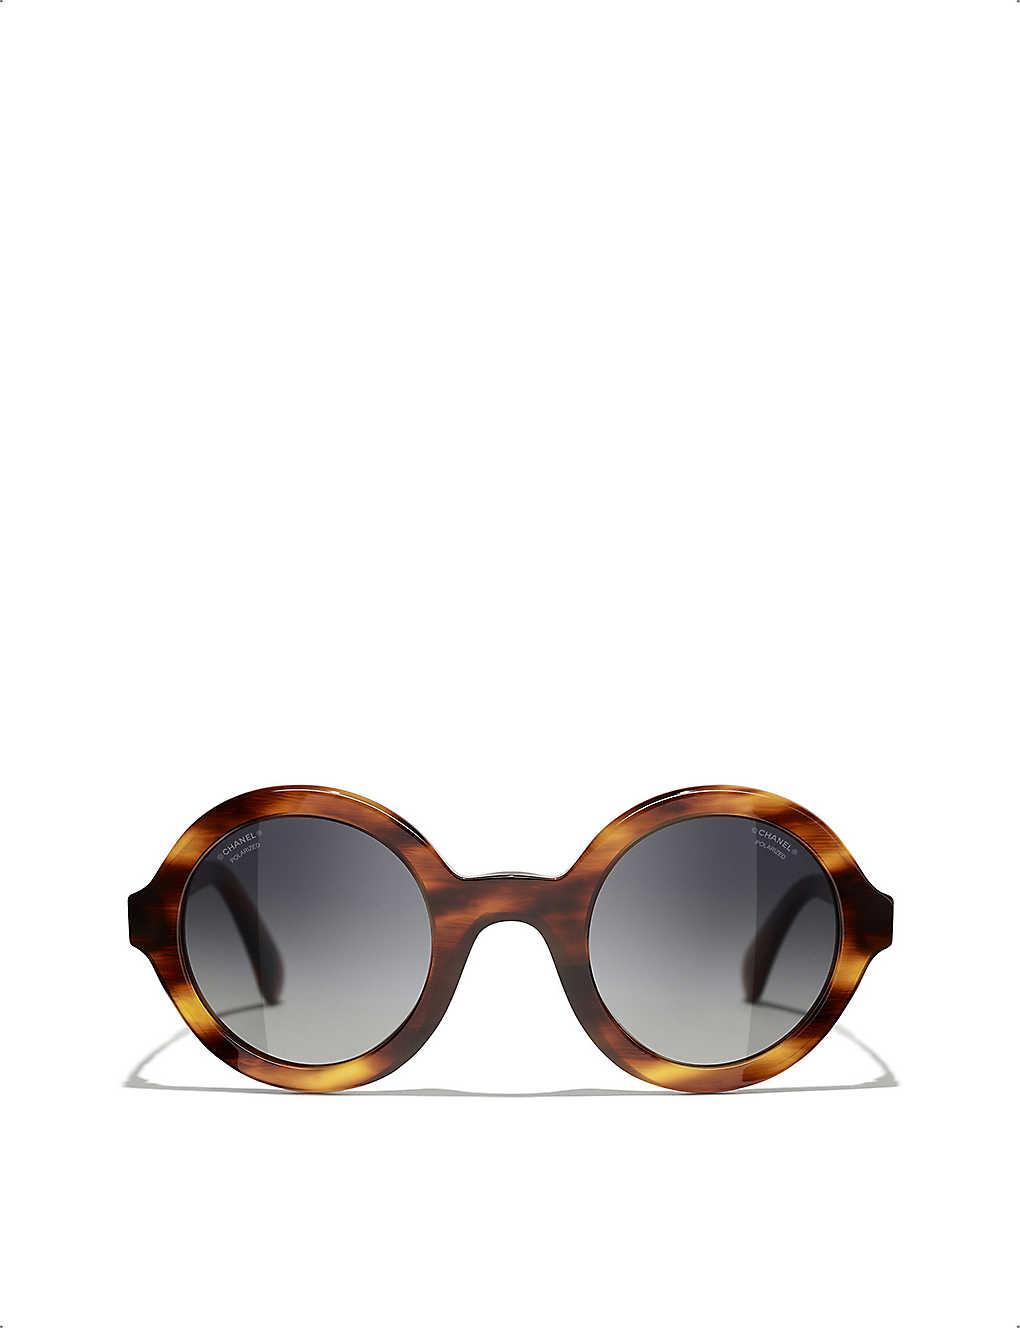 Chanel Round Frame Sunglasses in Brown